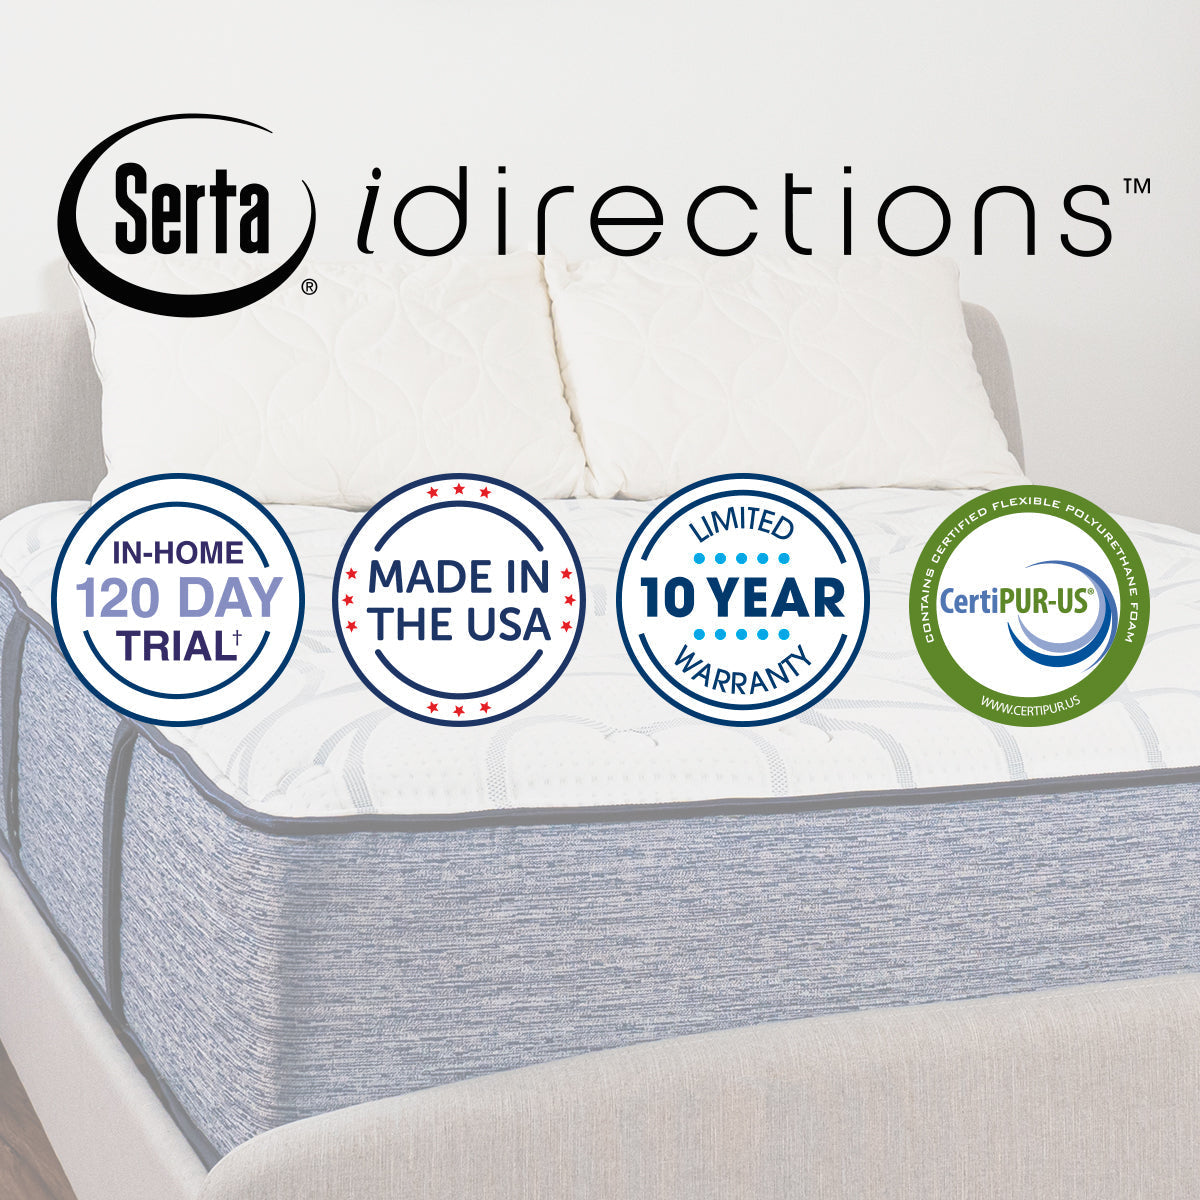 Serta iDirections X6 Hybrid II Firm Mattress Product Features; In-Home 120 Day Trial, Made in the USA, Limited 10 Year Warranty, CertiPUR-US Certified